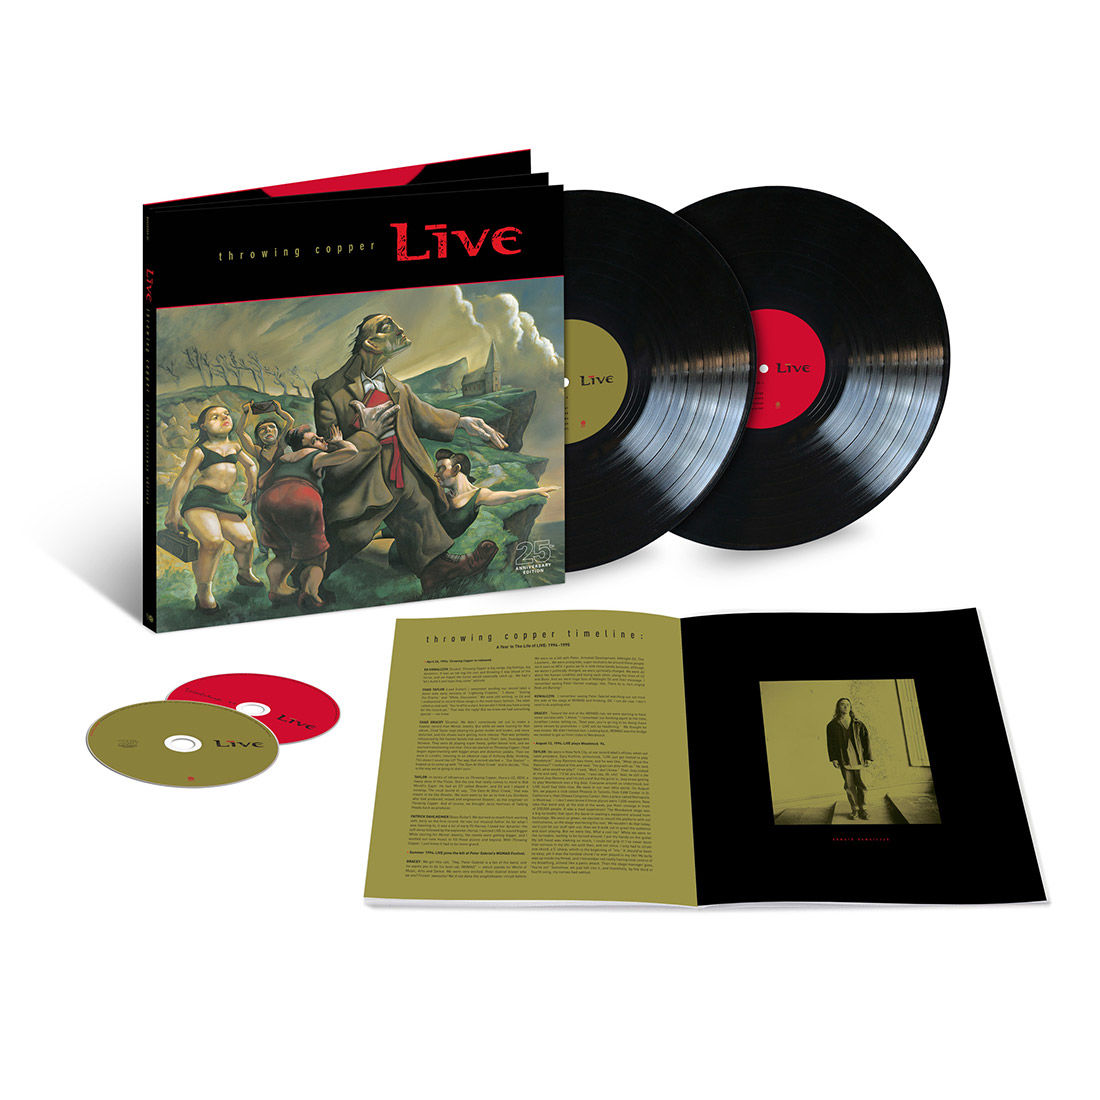 Live - Throwing Copper